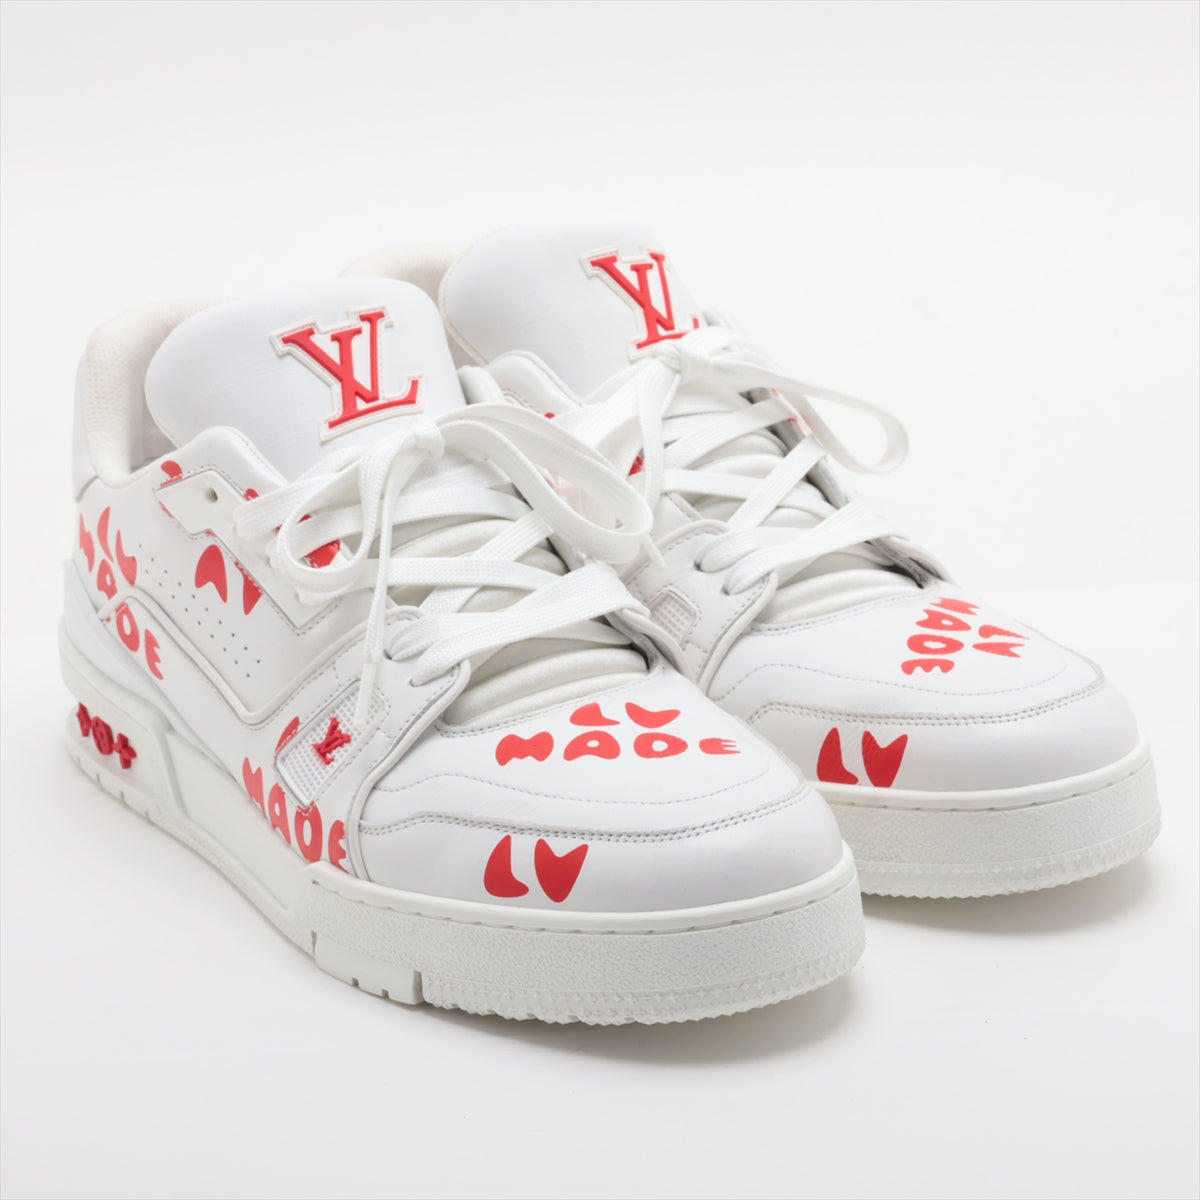 Louis Vuitton x Nigo LV Trainer Line 21 years Leather Sneakers UK8 1/2 Men's Red x white FD0291